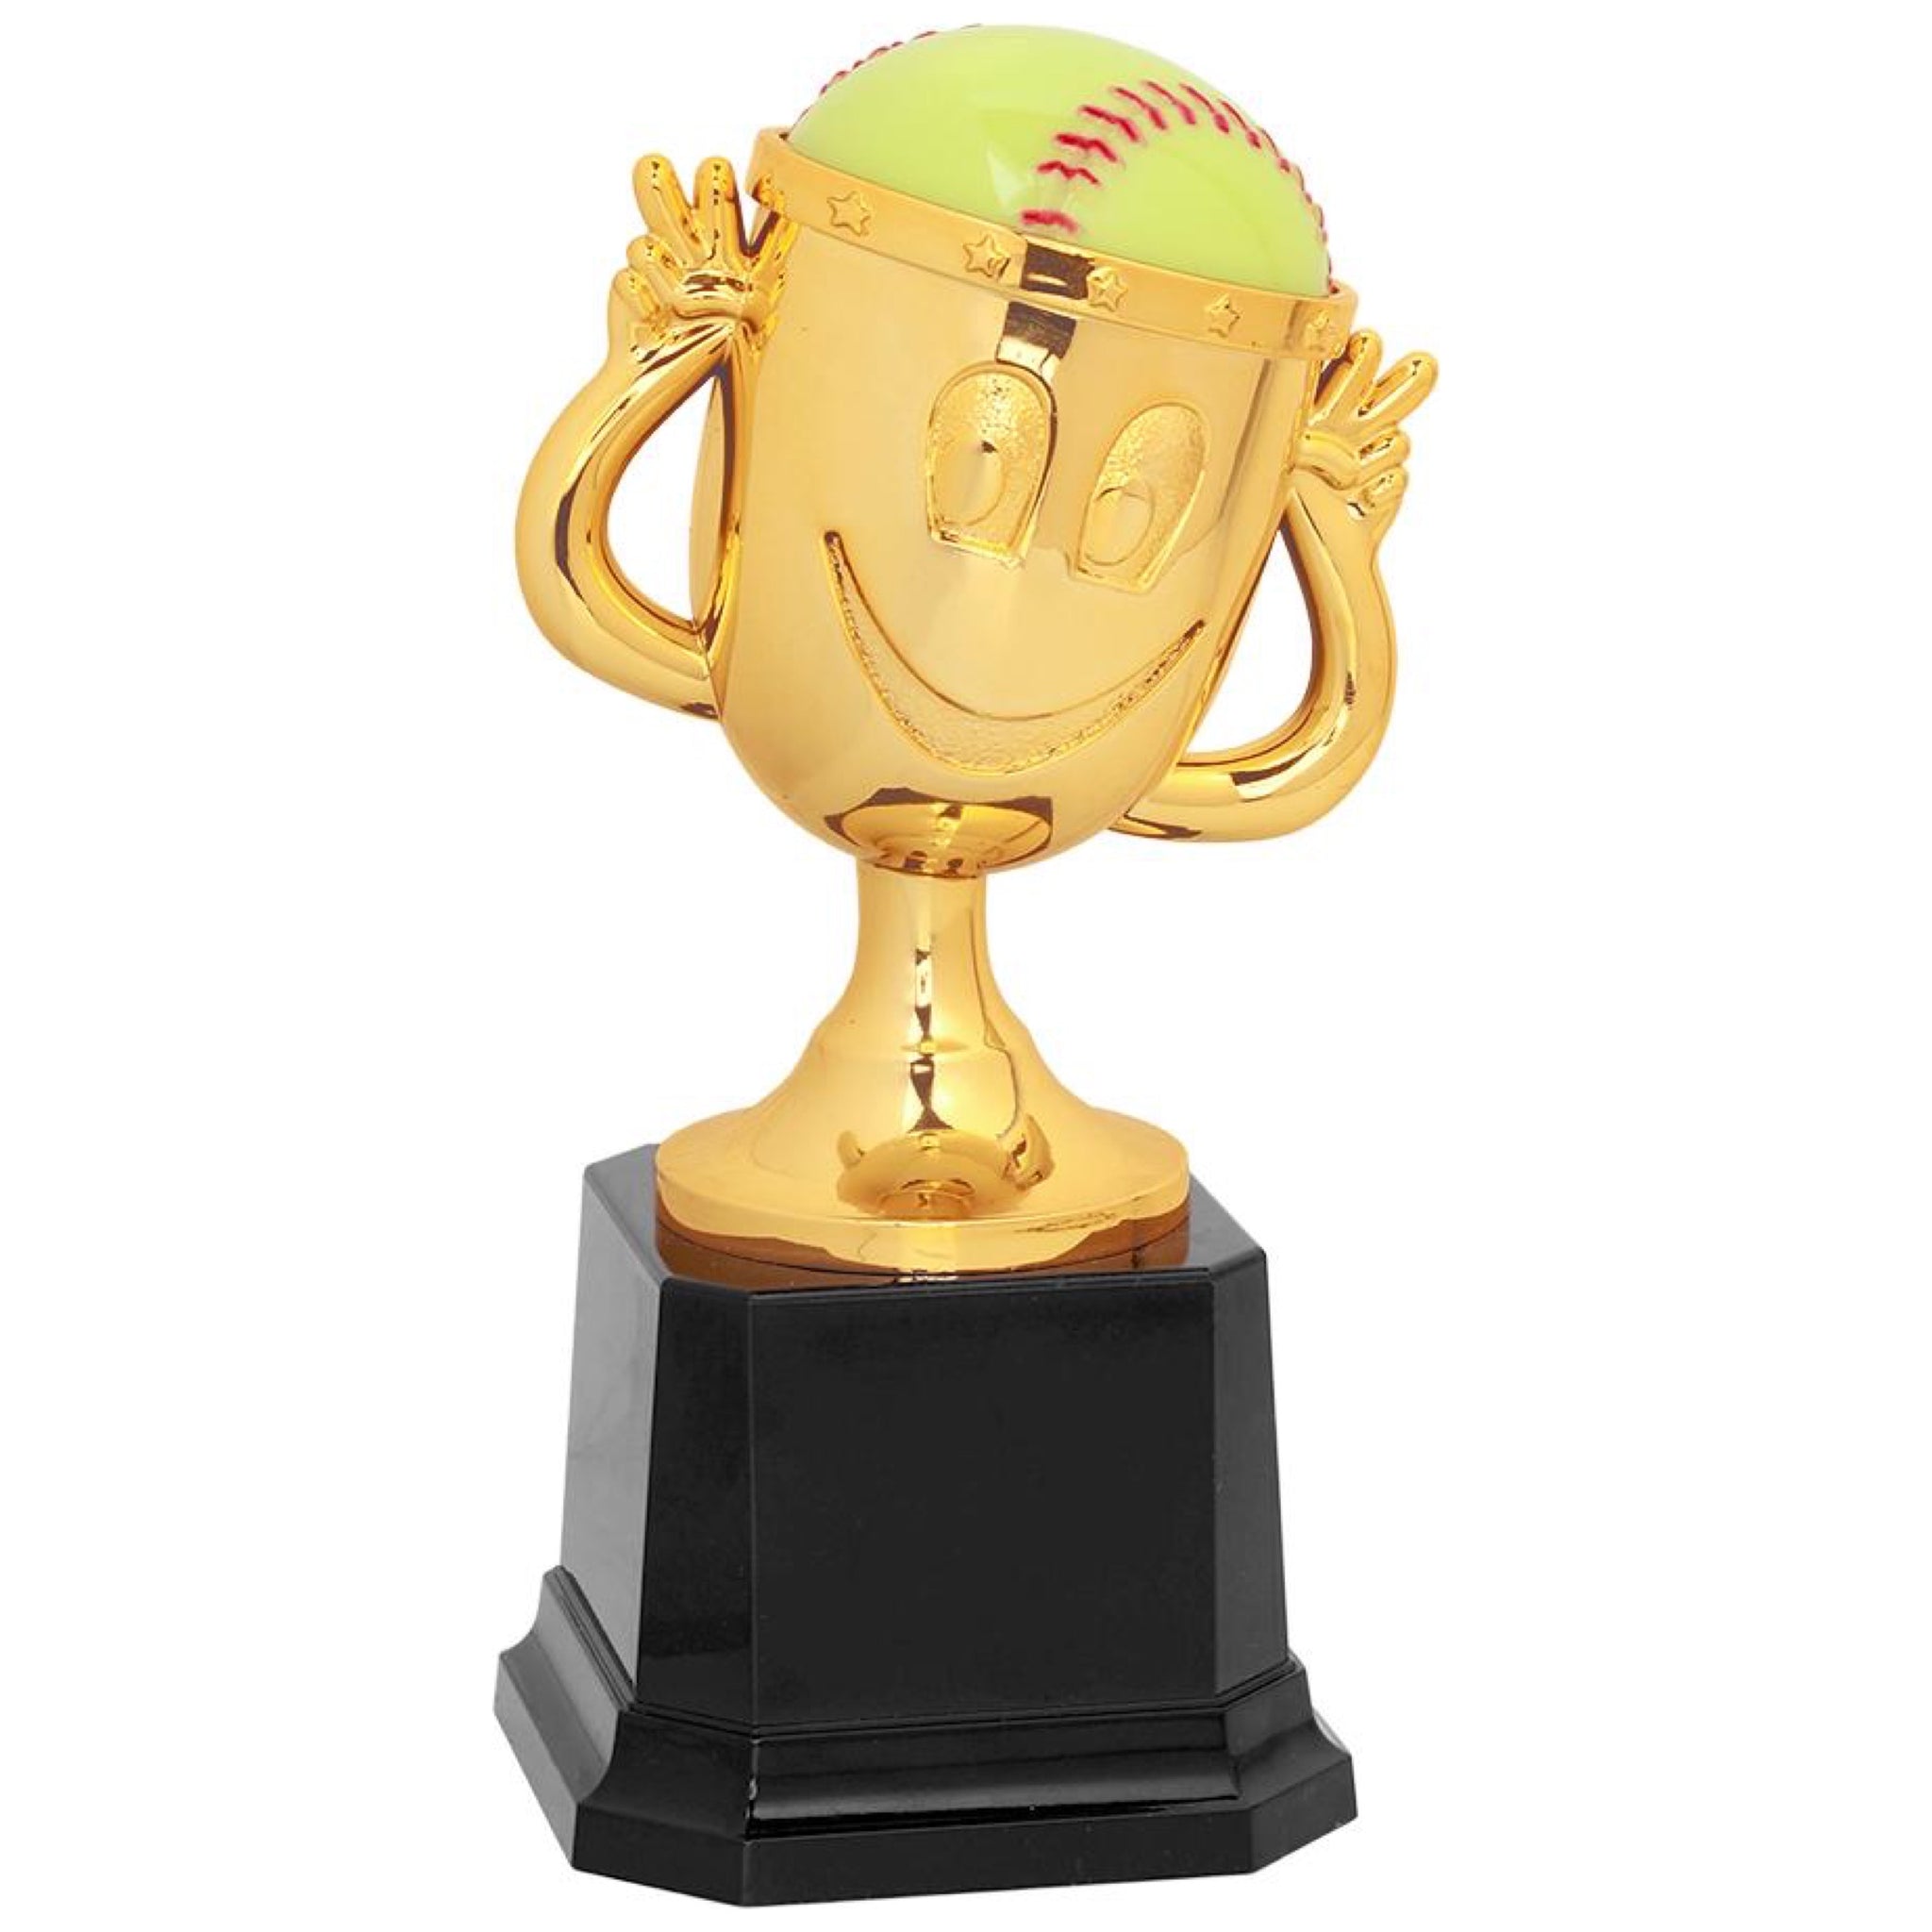 Kids softball cup trophy featuring a square black base and a small gold cup attached. The gold cup has two arms, a happy face, and a softball sticking out of the top of the cup.